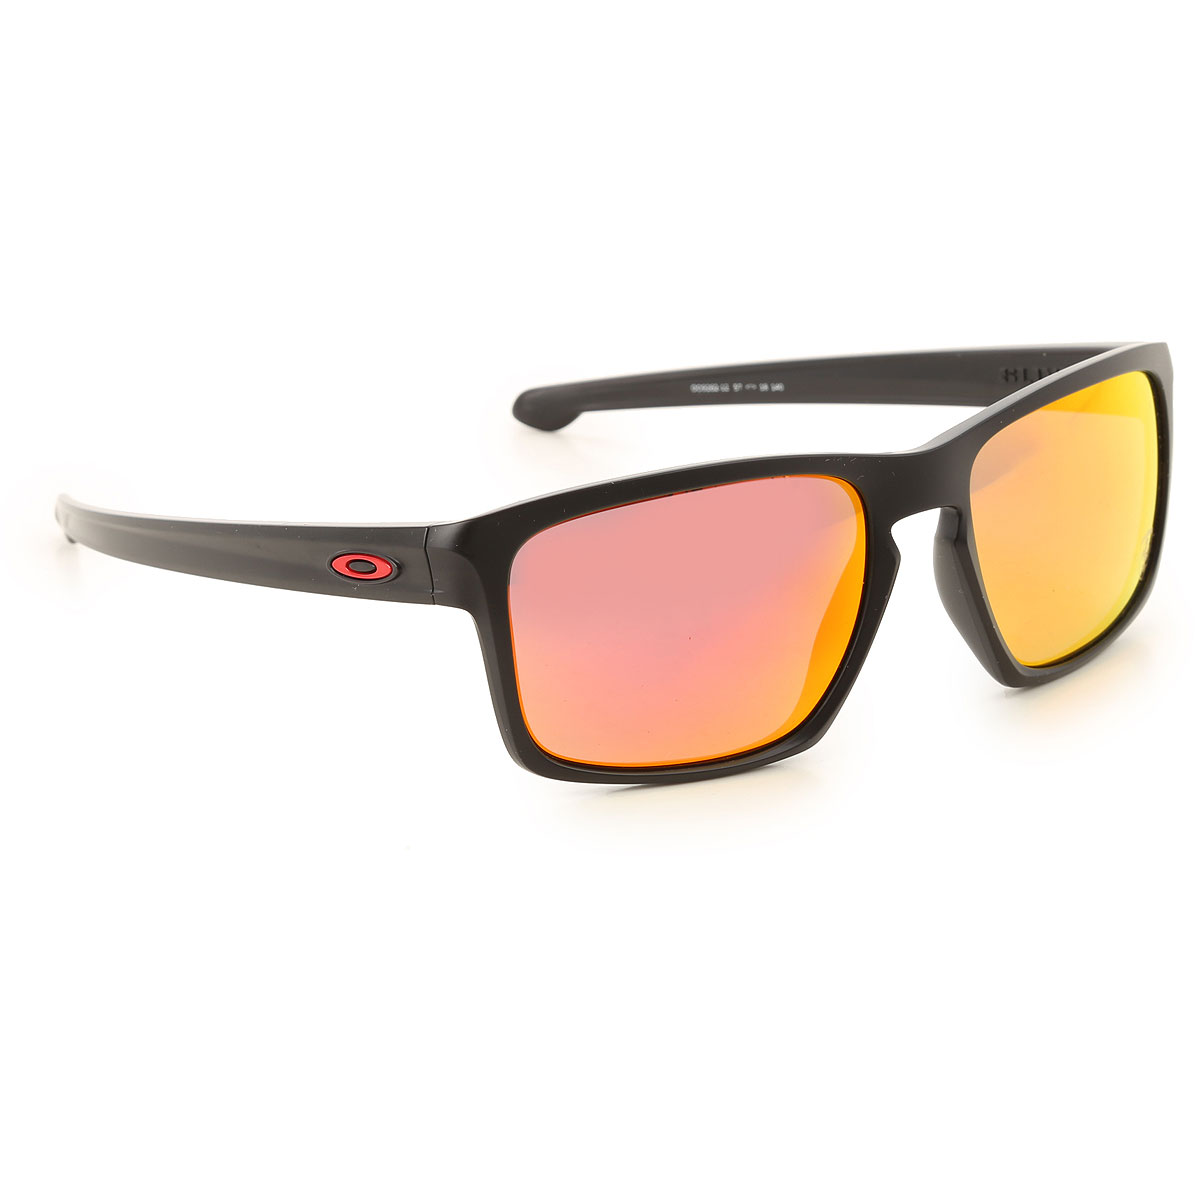 Sunglasses Oakley, Style code: sliver-oo9262-12